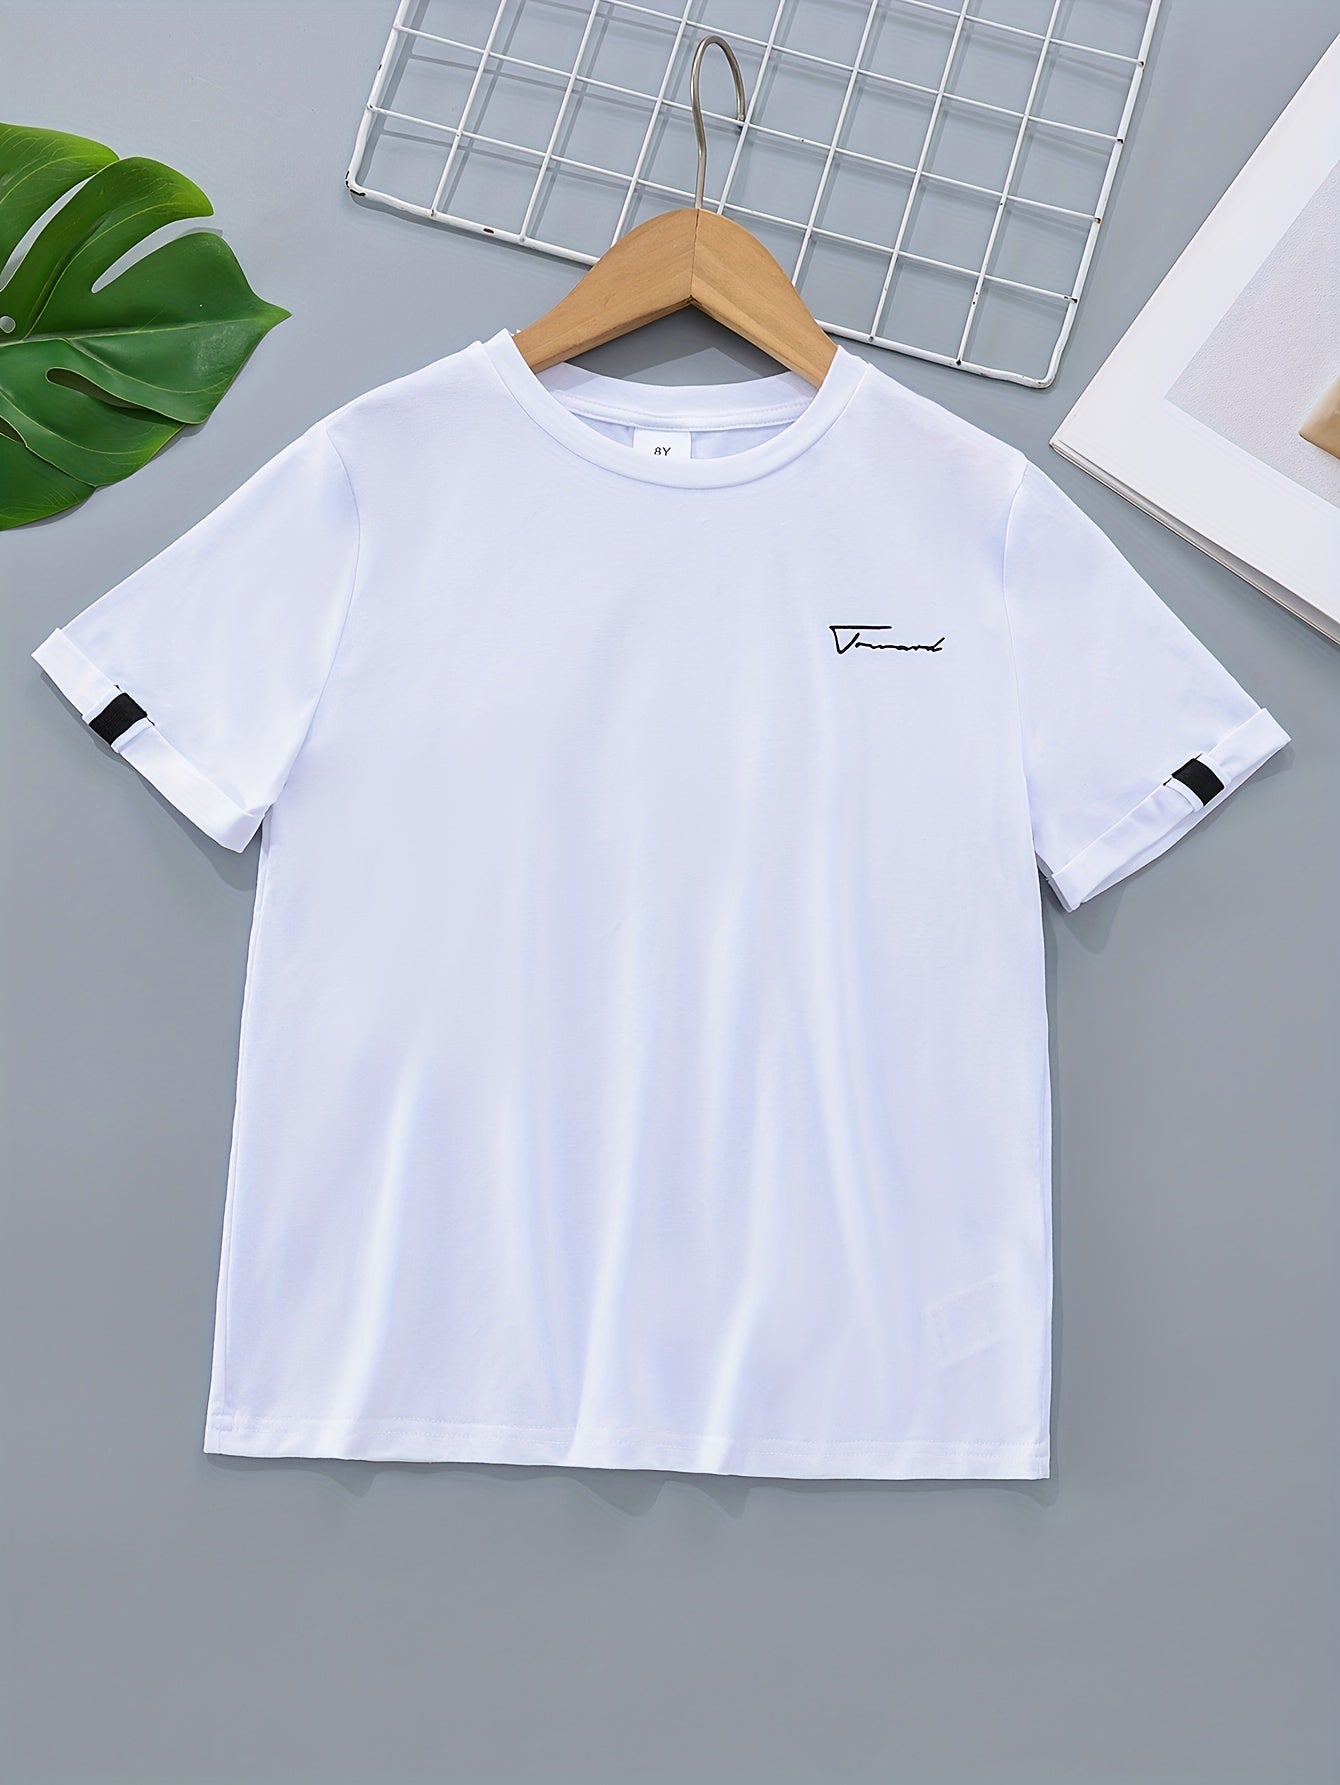 2pcs Stylish Letter Print T-Shirts For Boys - Cool, Lightweight And Comfy Summer Clothes!